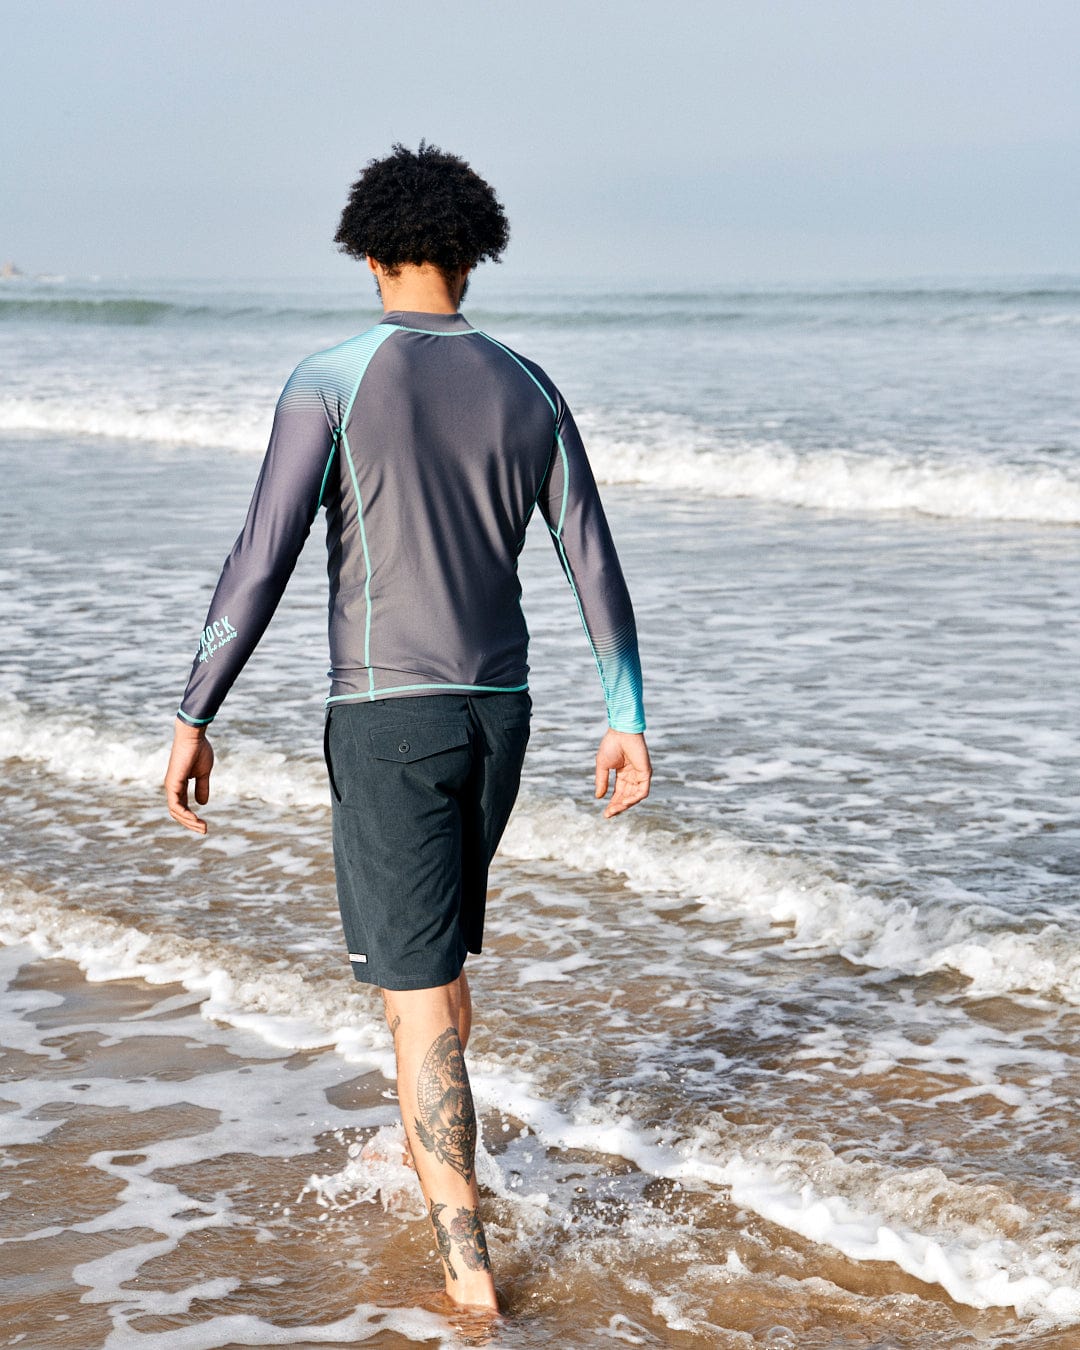 A man with curly hair walking into the sea, wearing a men's long-sleeved DNA Wave - Mens Long Sleeve Rashvest in Grey/Turquoise and shorts, and showing a tattoo on his left calf.